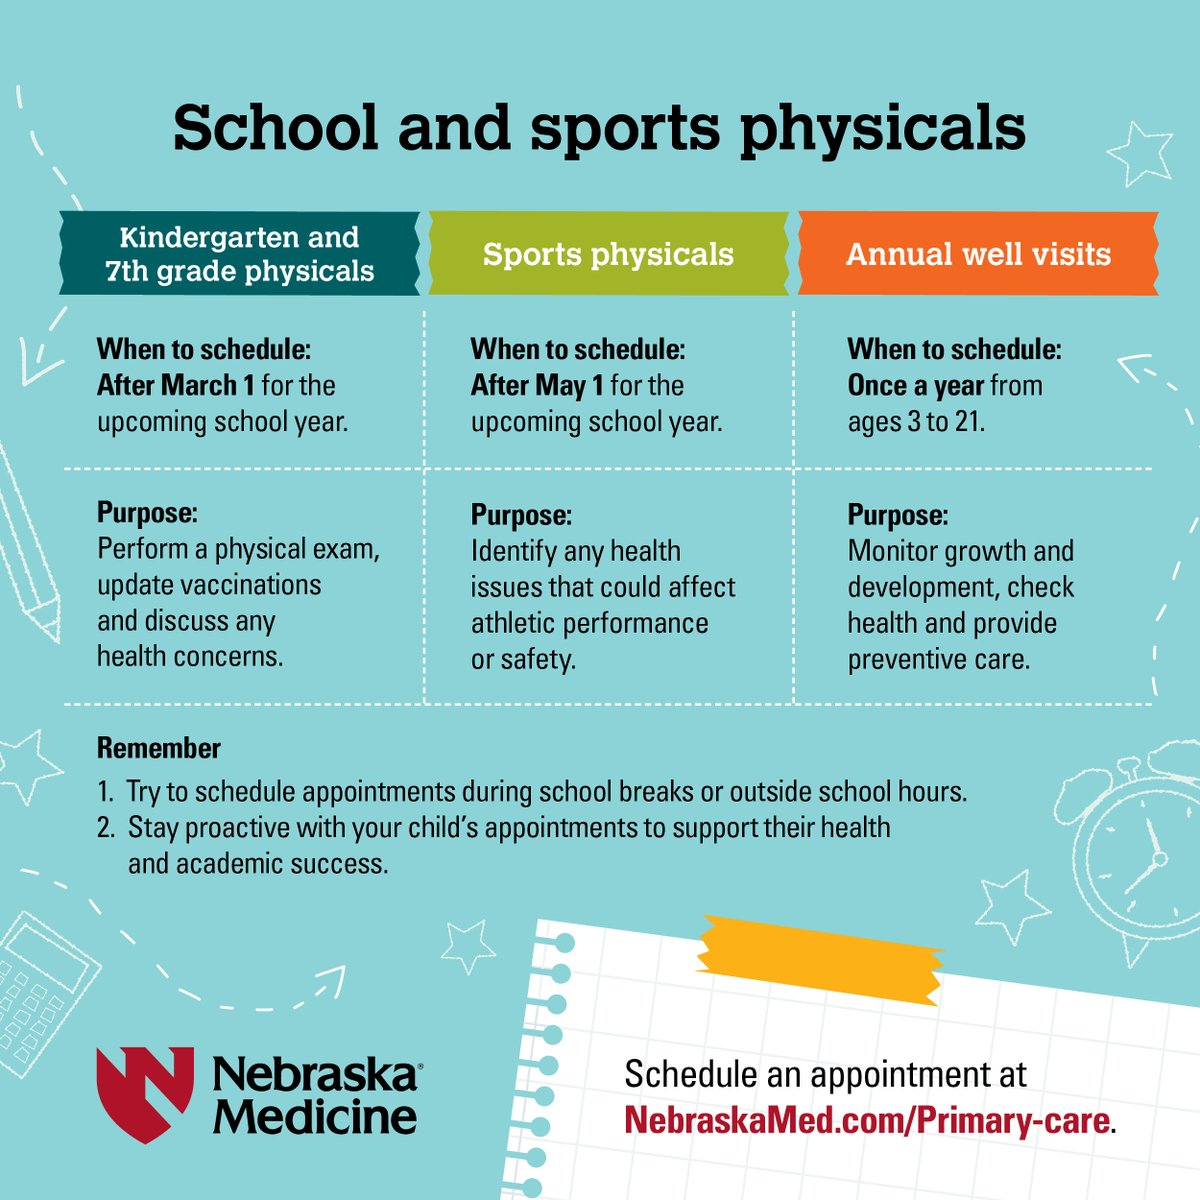 Now is the perfect time to schedule kids' annual physicals! Visit one of our ten family medicine locations across the Omaha metro. Schedule an appointment at NebraskaMed.com/Primary-care. How are you helping your kids stay healthy and active this summer? Comment below!